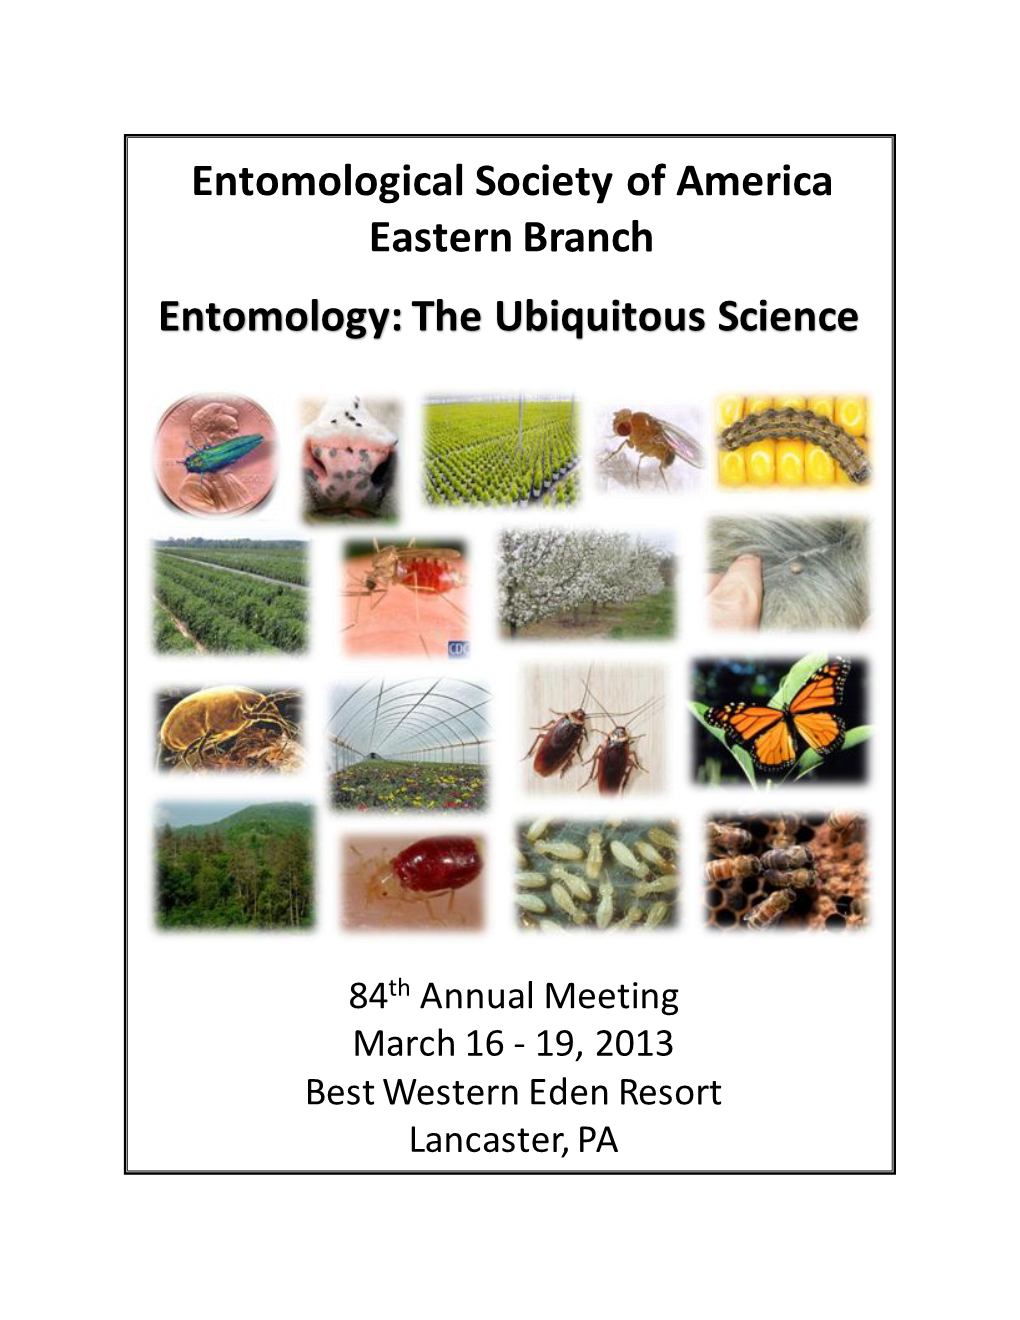 Entomological Society of America Eastern Branch Entomology: the Ubiquitous Science